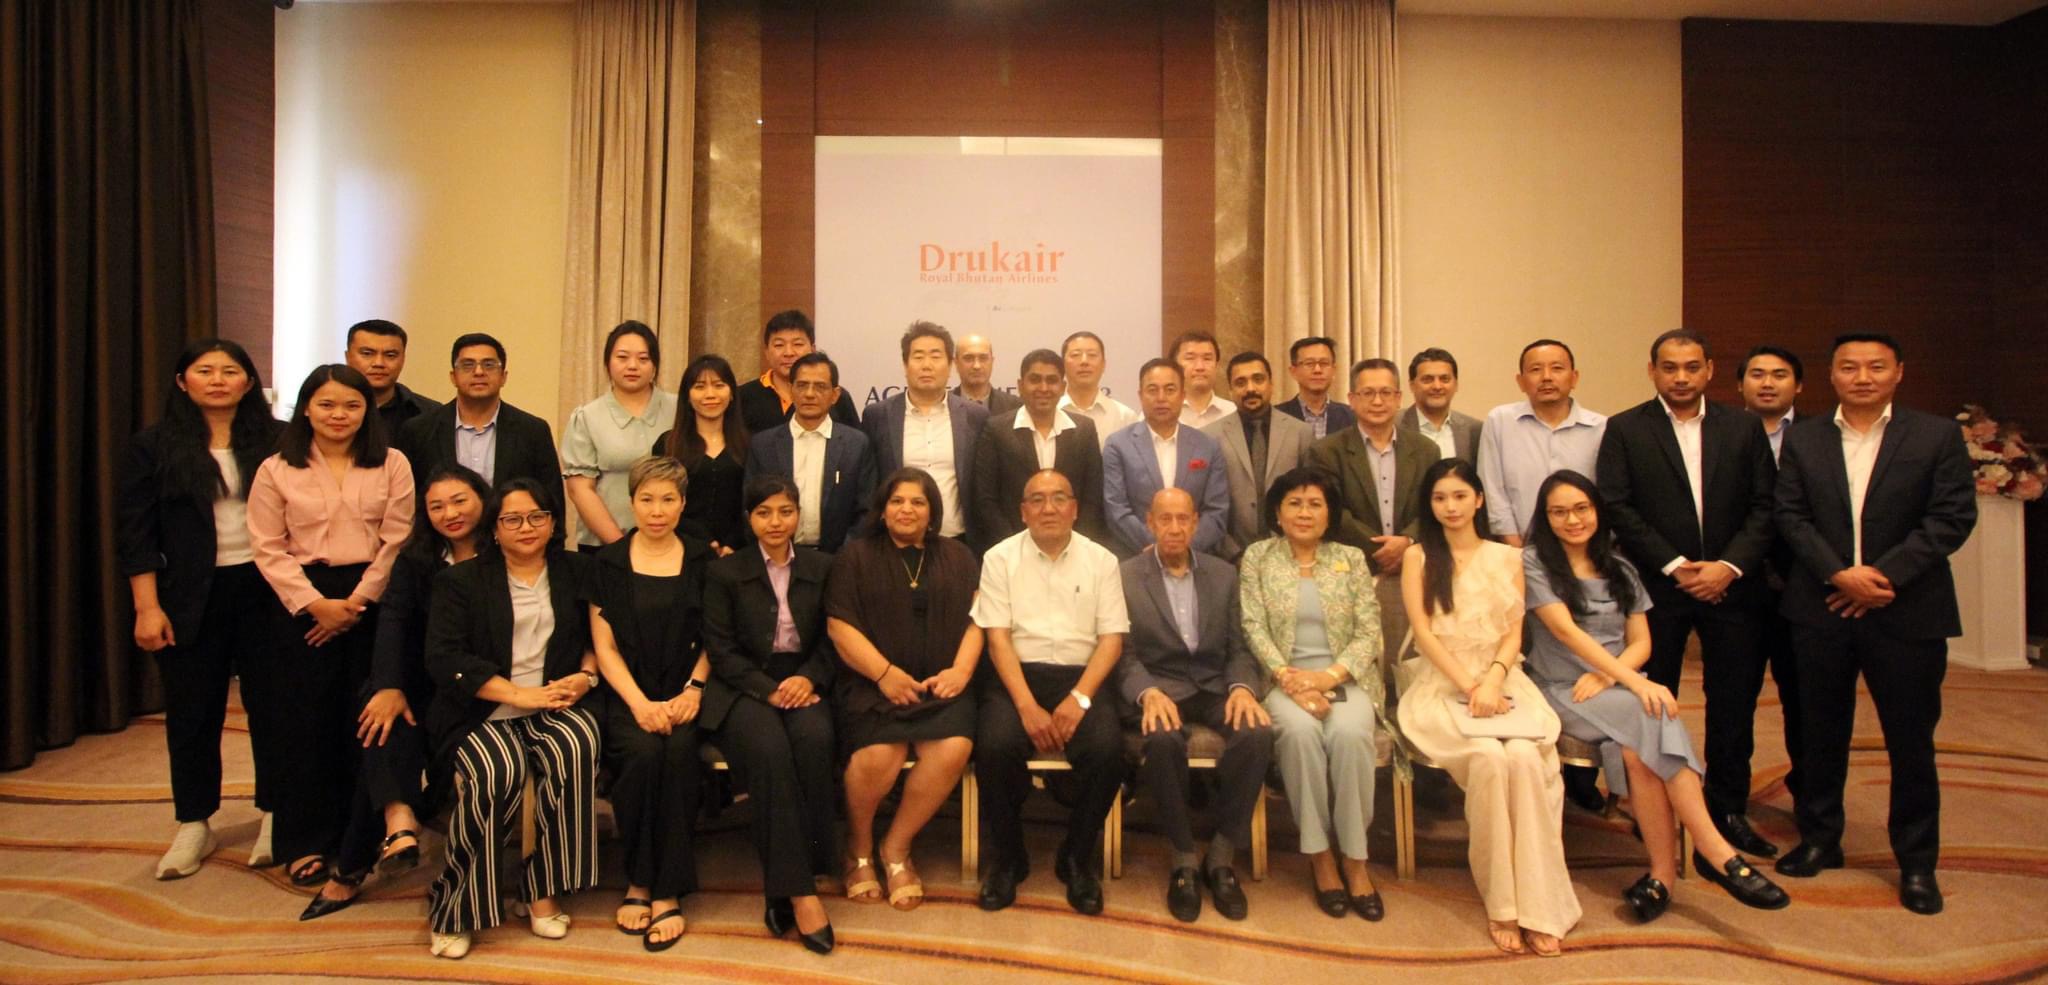 Drukair conducted an Agents Meet 2023 in Bangkok, Thailand amidst the Post Covid Reconnection, and strategic Planning.